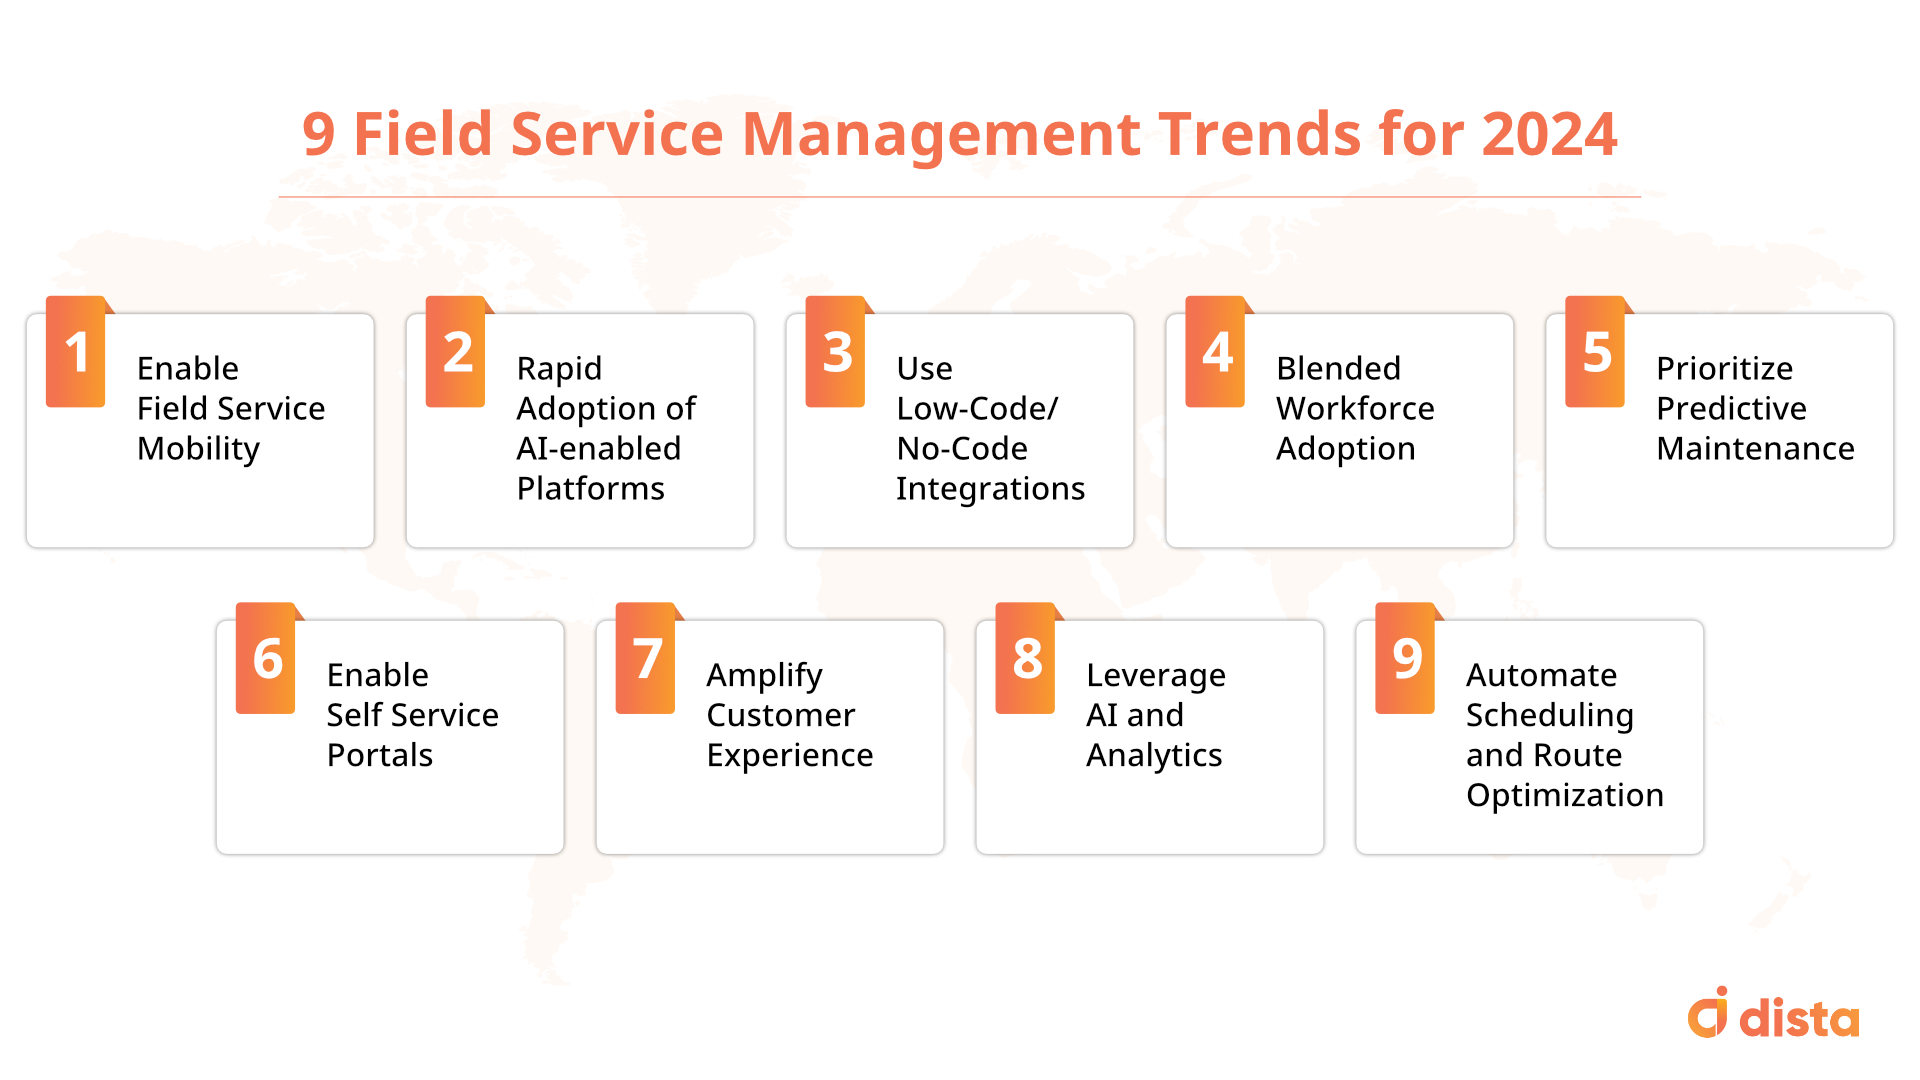 Field Service Management Trends for 2024